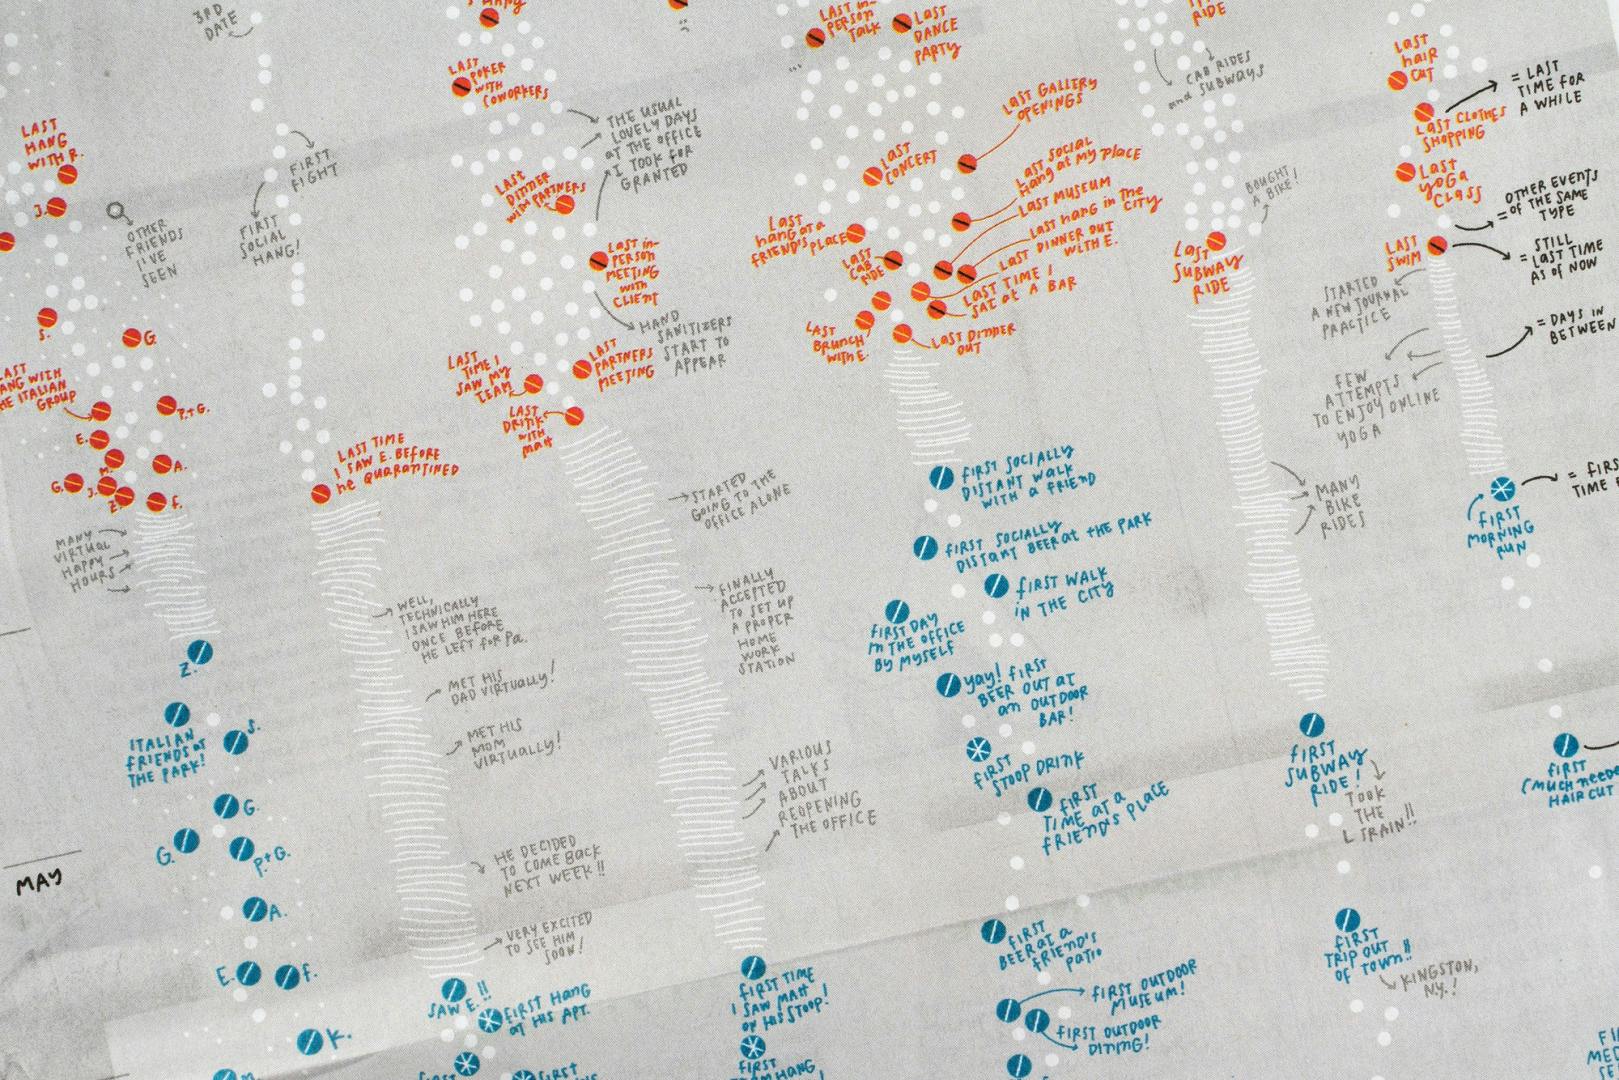 Stitched data design for the New York Times supplement cover by Giorgia Lupi